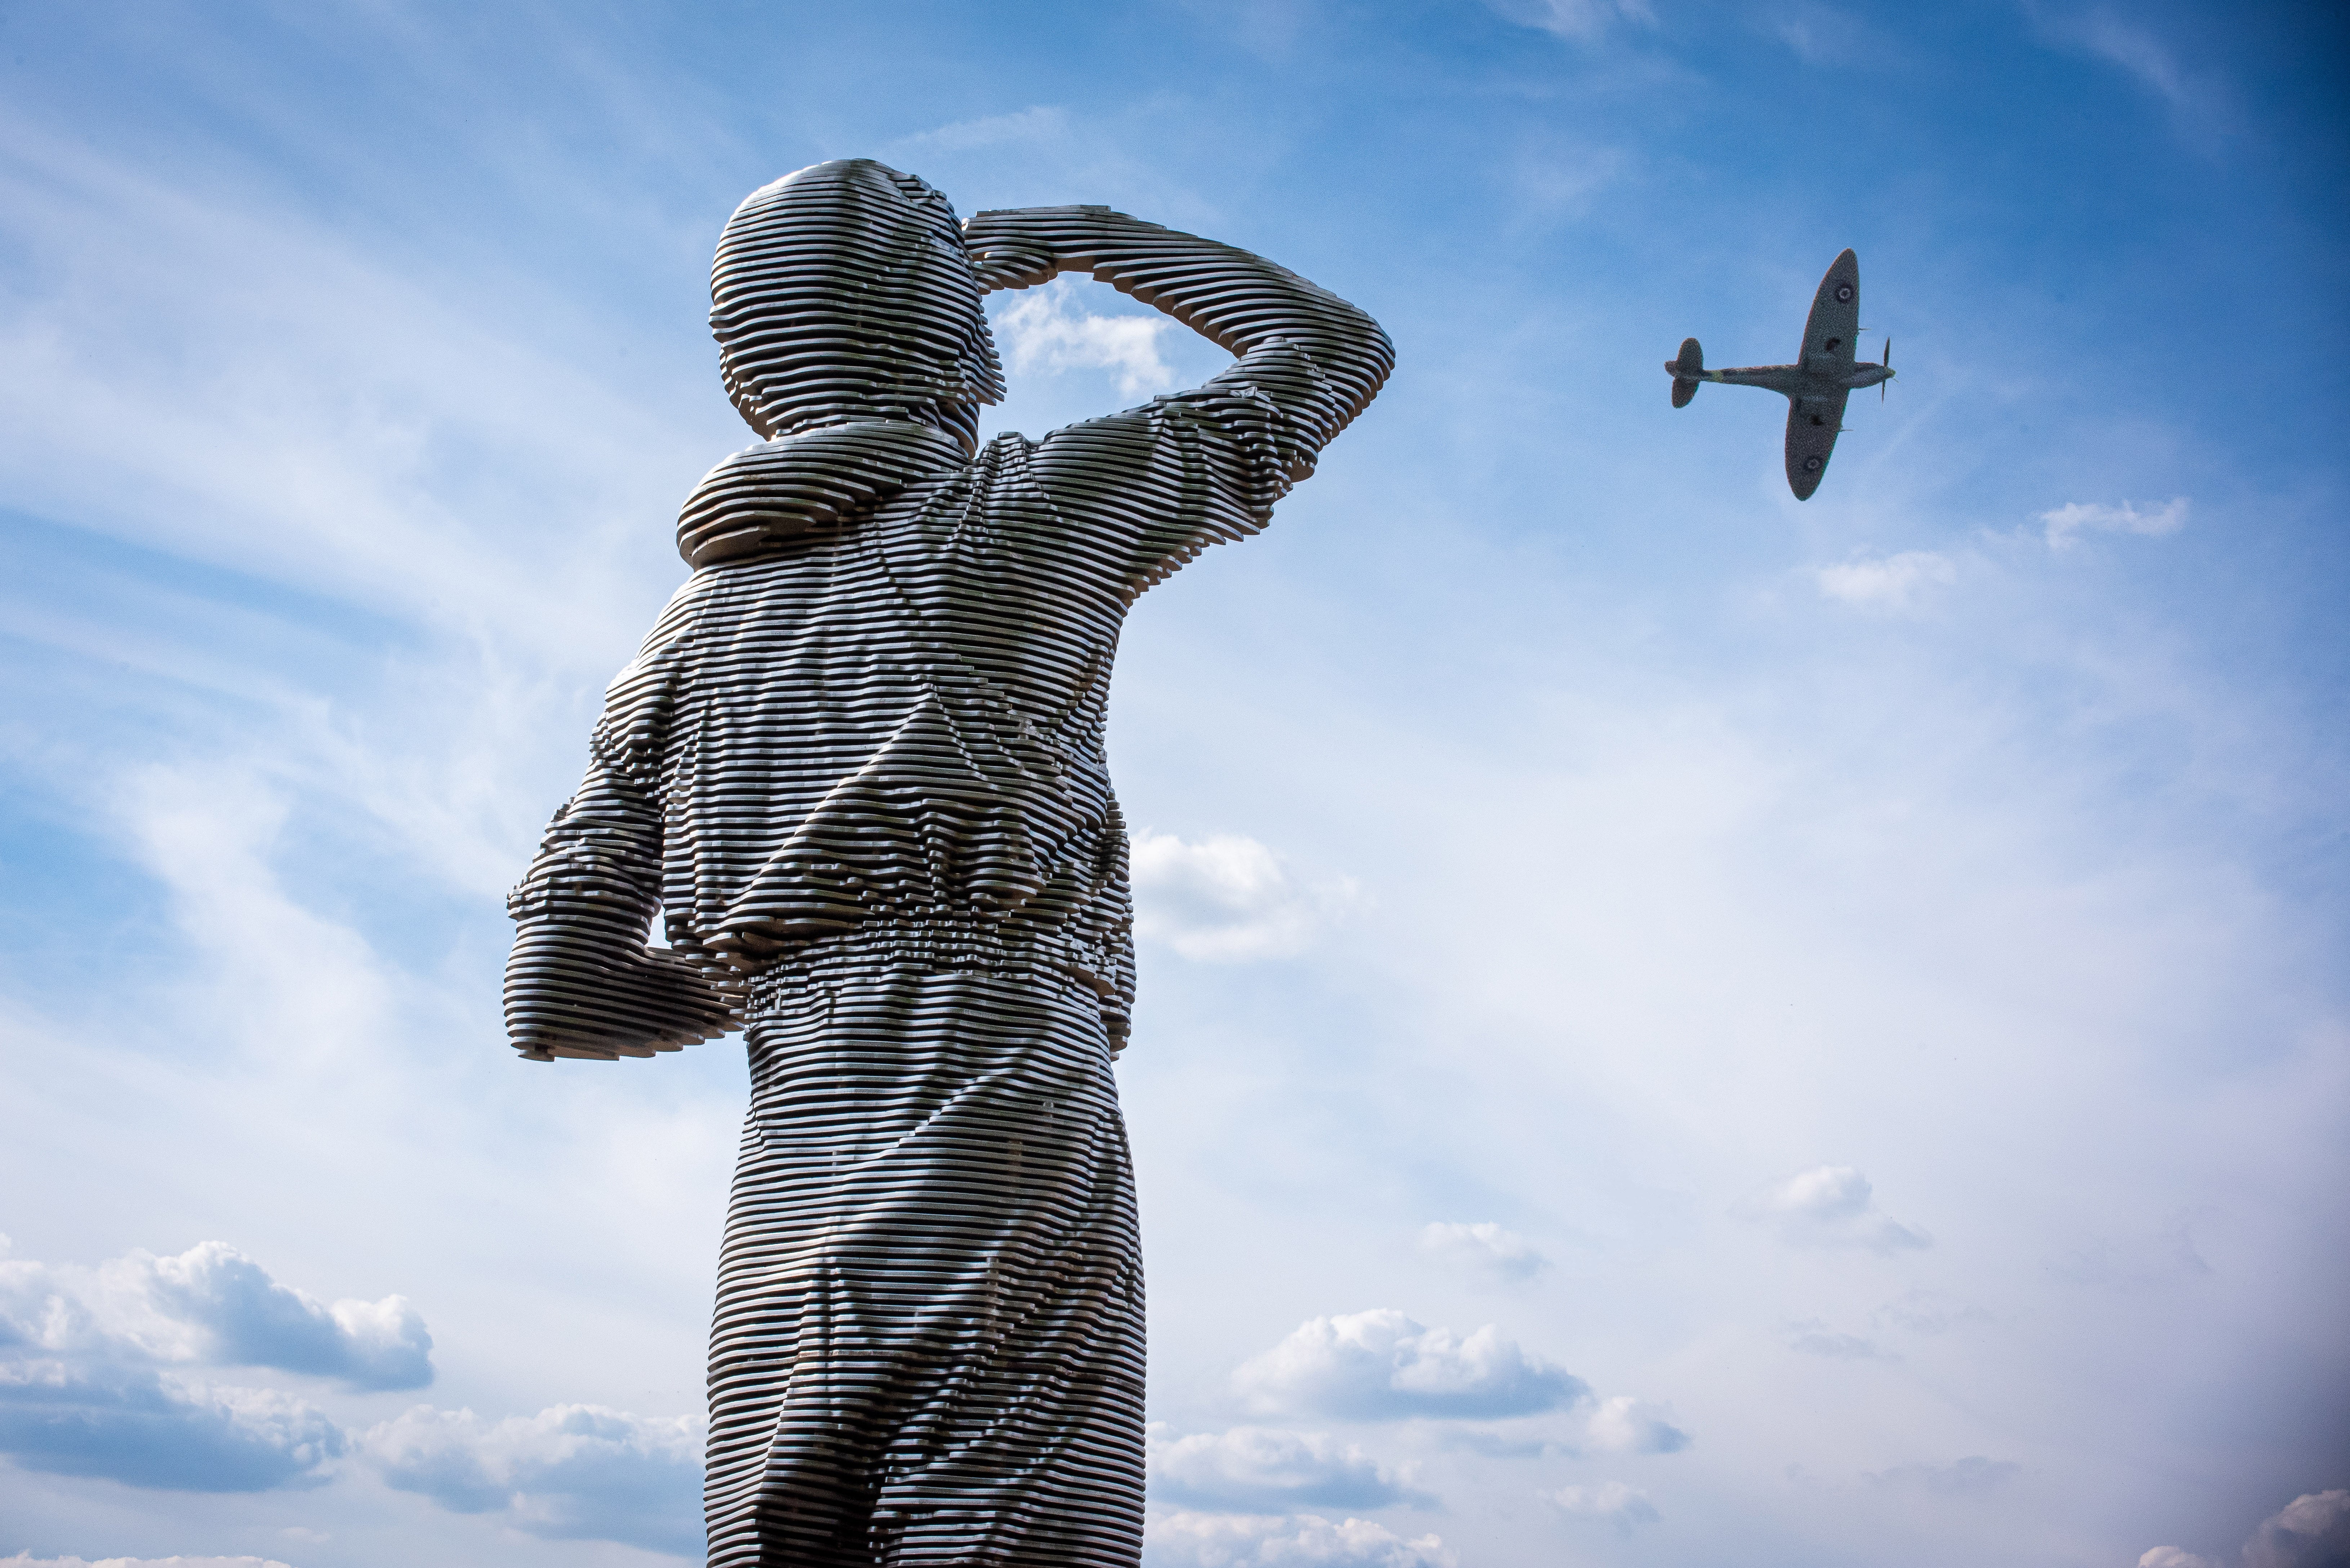 Image shows metal sculpture looking towards the sky with Spitfire flying overhead.